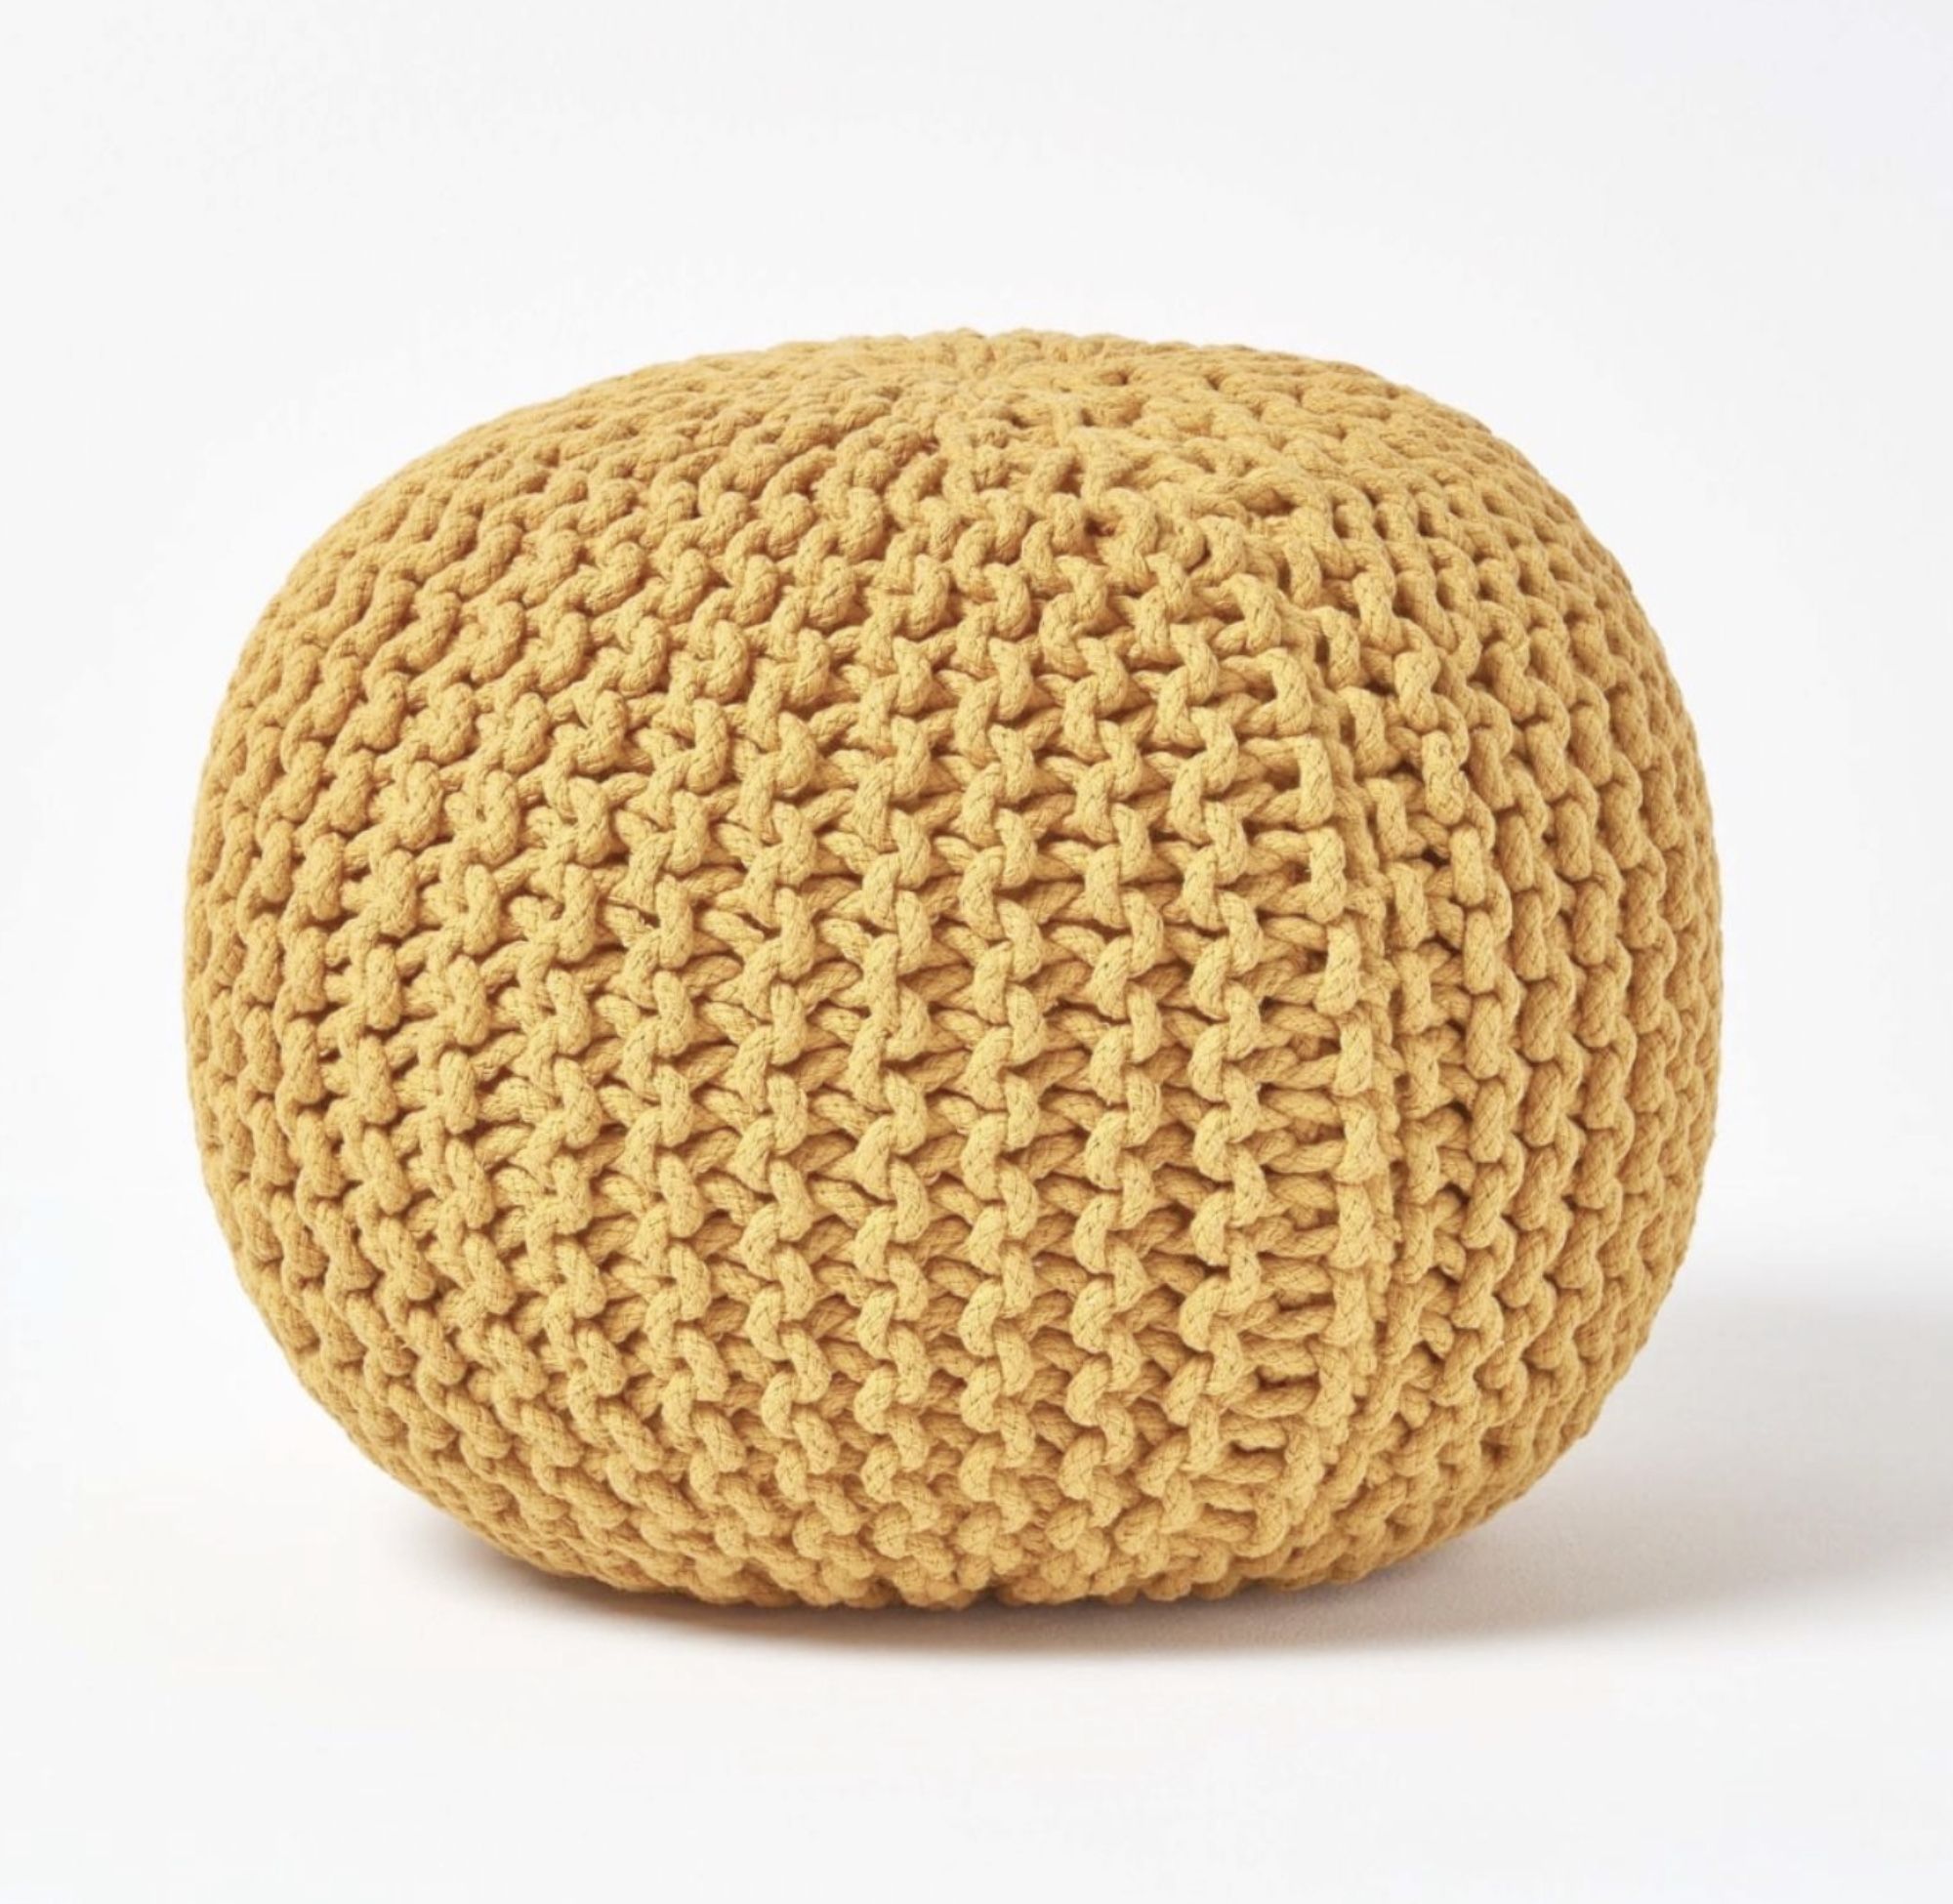 Hand Knitted Cable Style 100% Cotton Braided Cord Pouf Ottoman 20 Inch With Regard To Cream Cotton Knitted Pouf Ottomans (View 10 of 20)